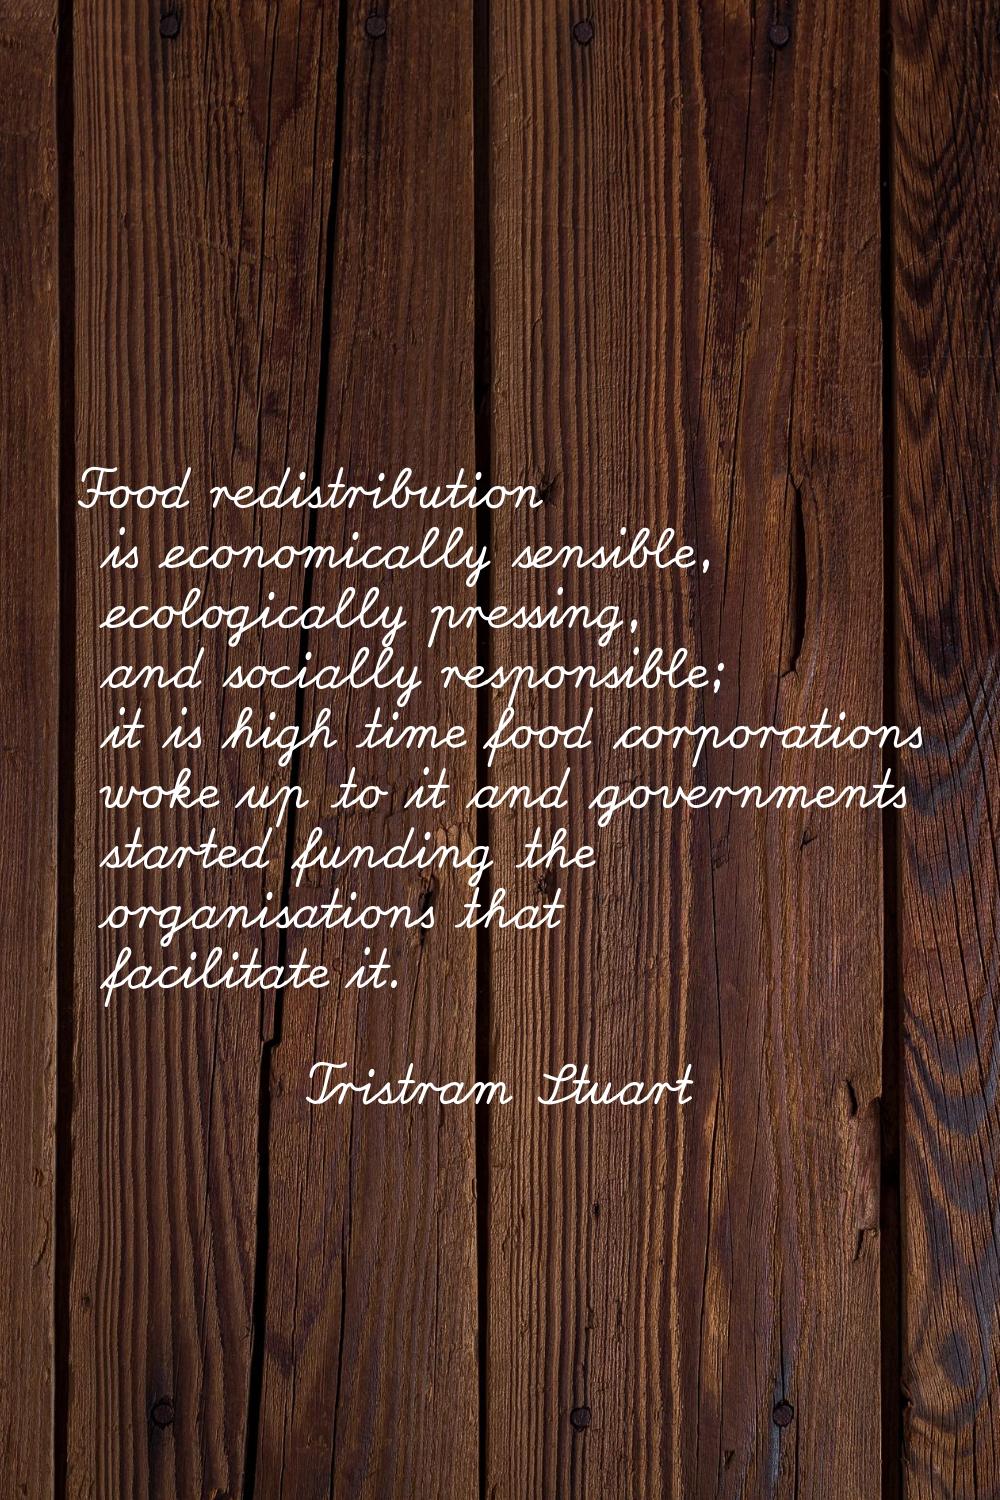 Food redistribution is economically sensible, ecologically pressing, and socially responsible; it i